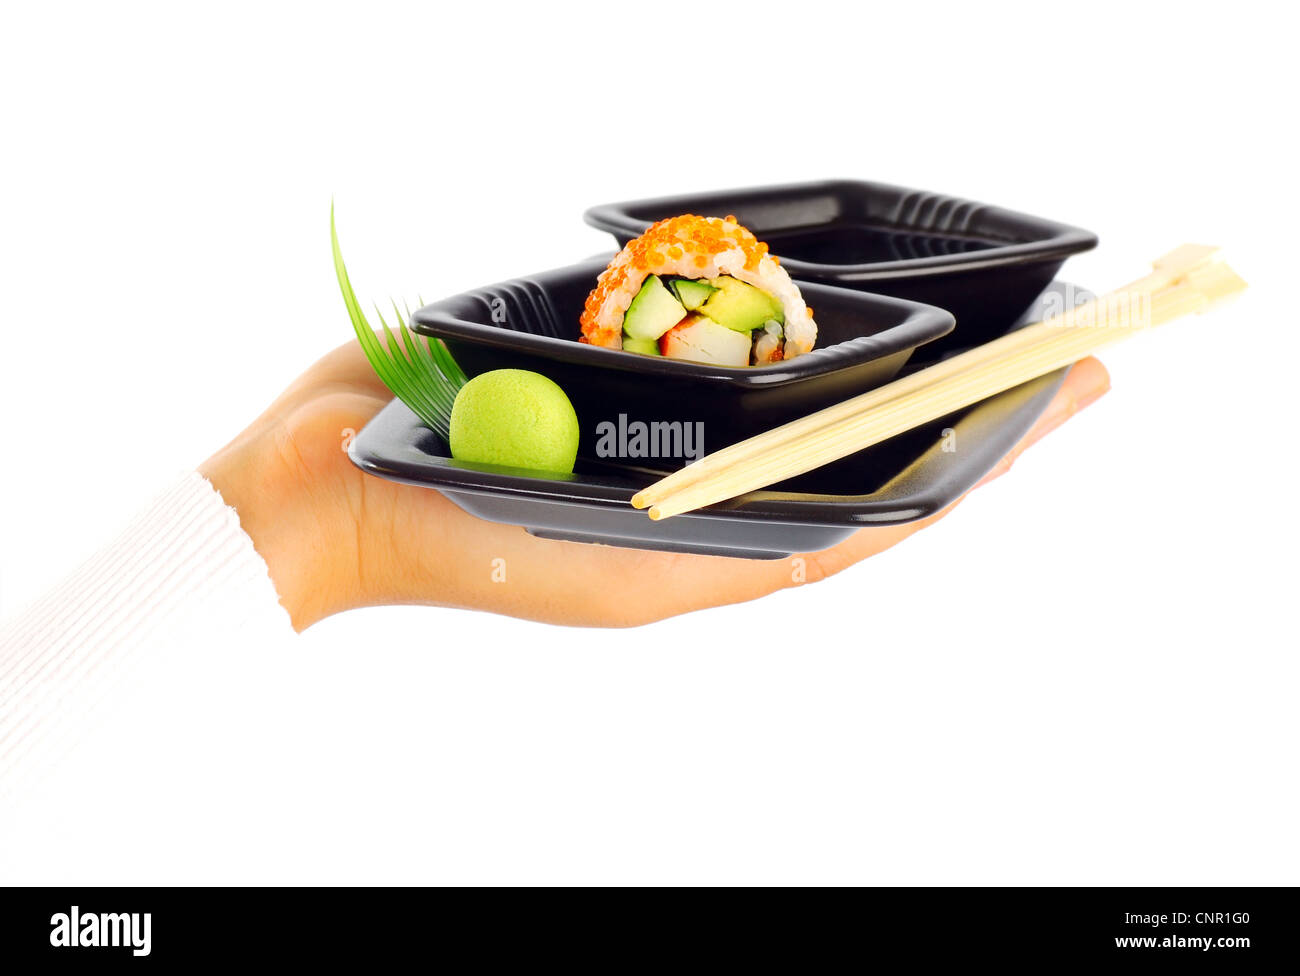 Waiter's hand isolated on white background with a tray of designed Japanese roll Stock Photo